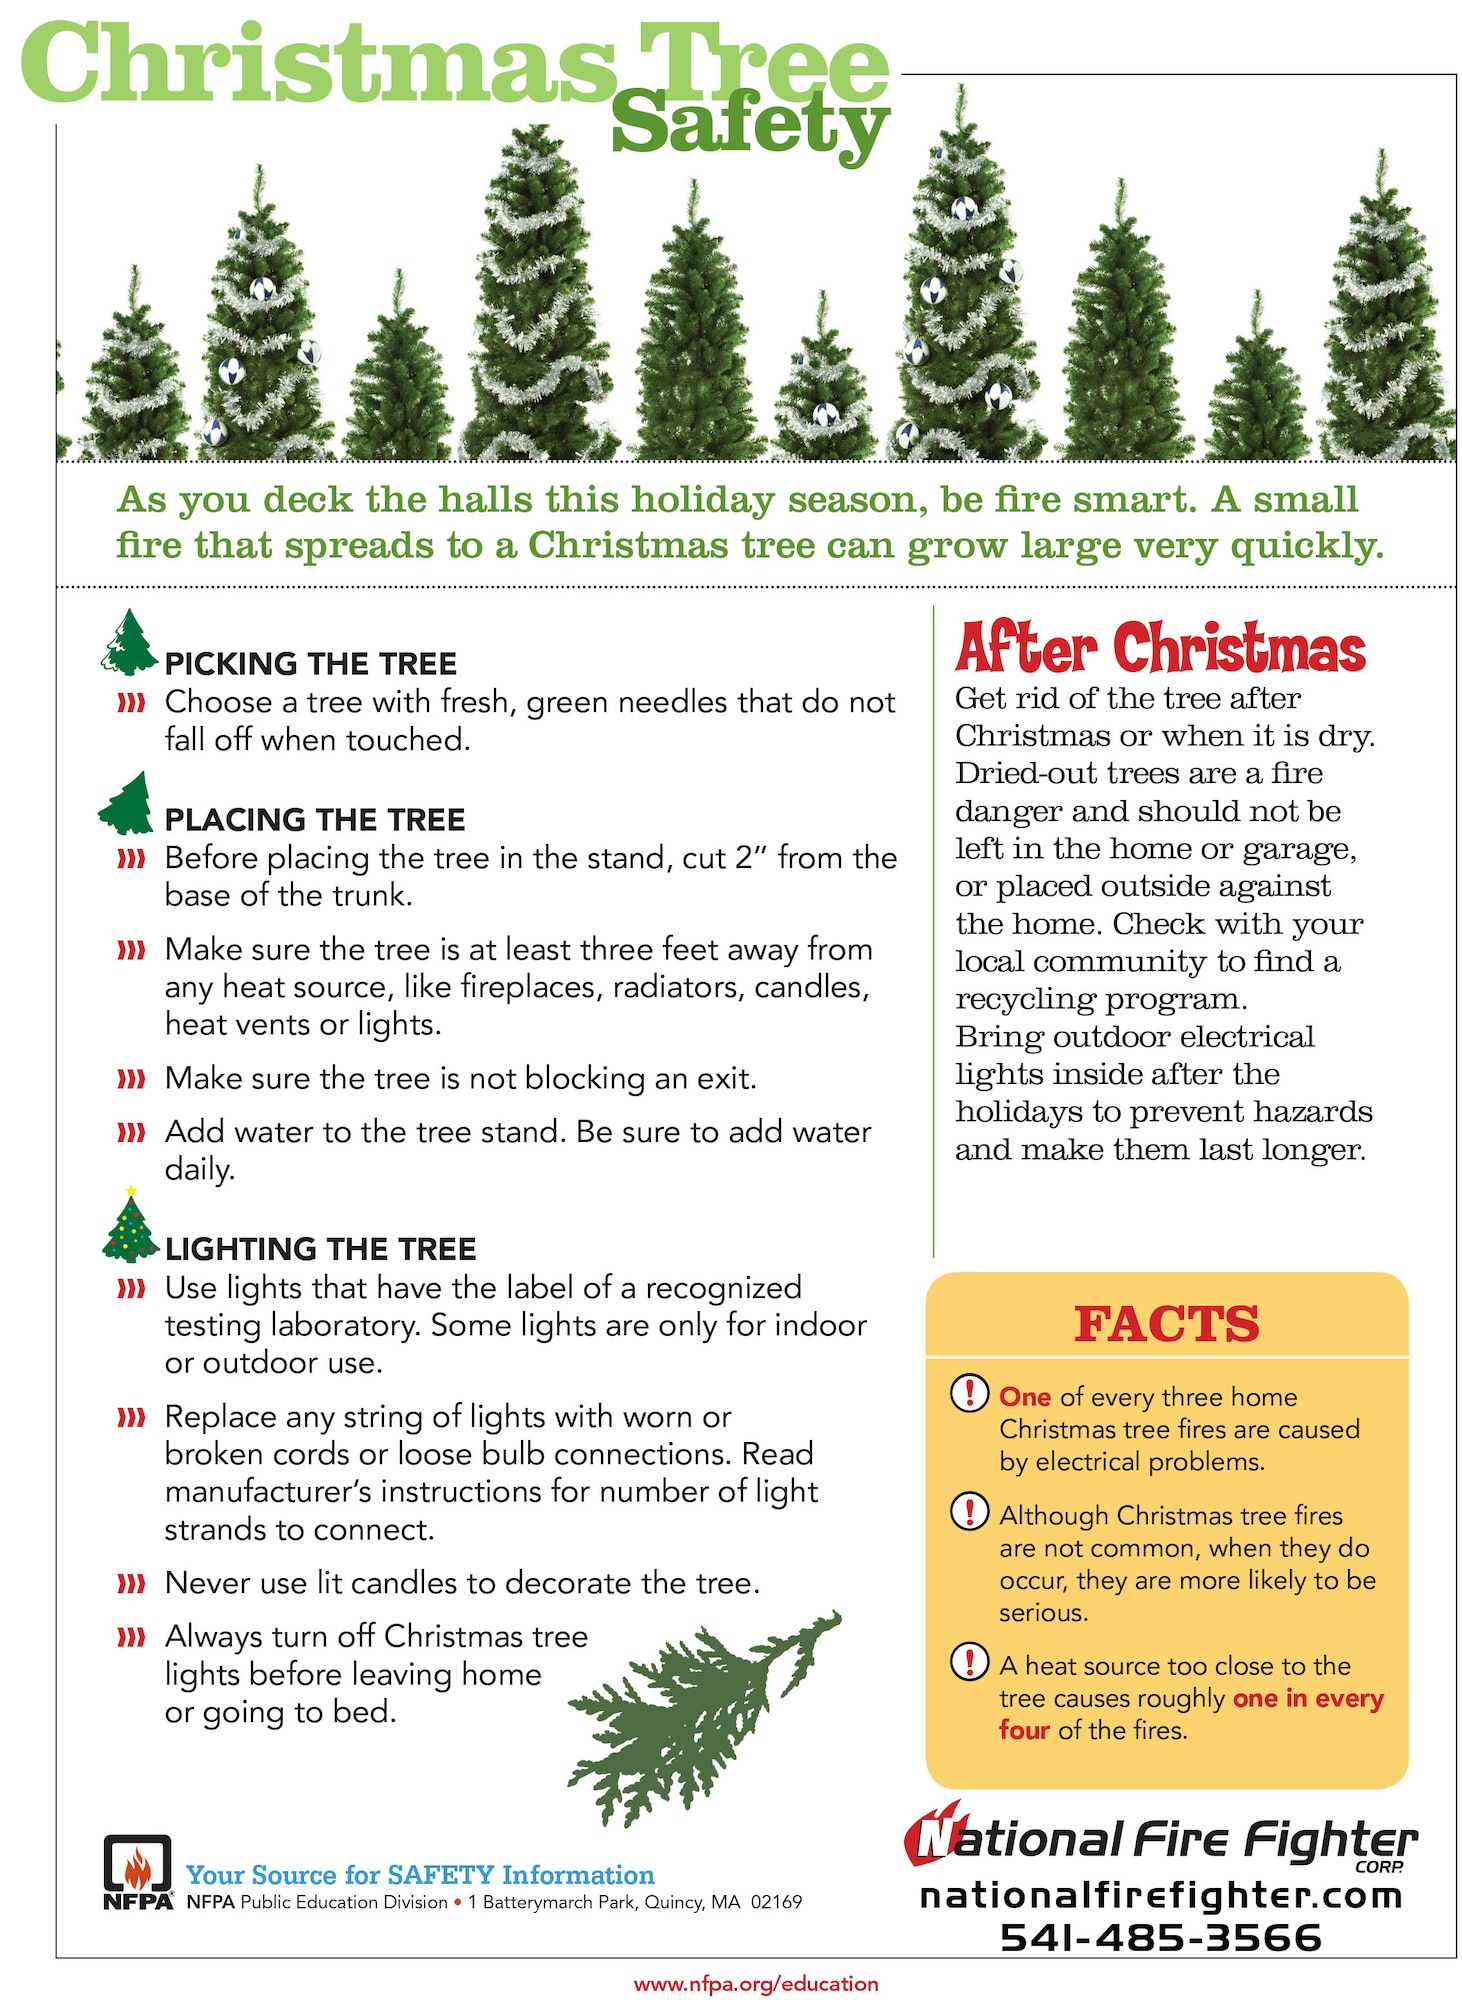 Each year, approximately 400 fires occur that involve Christmas trees, according to the National Fire Protection Association, or NFPA, resulting in more than a dozen deaths, numerous injuries and more than $10 million in property loss and damage.